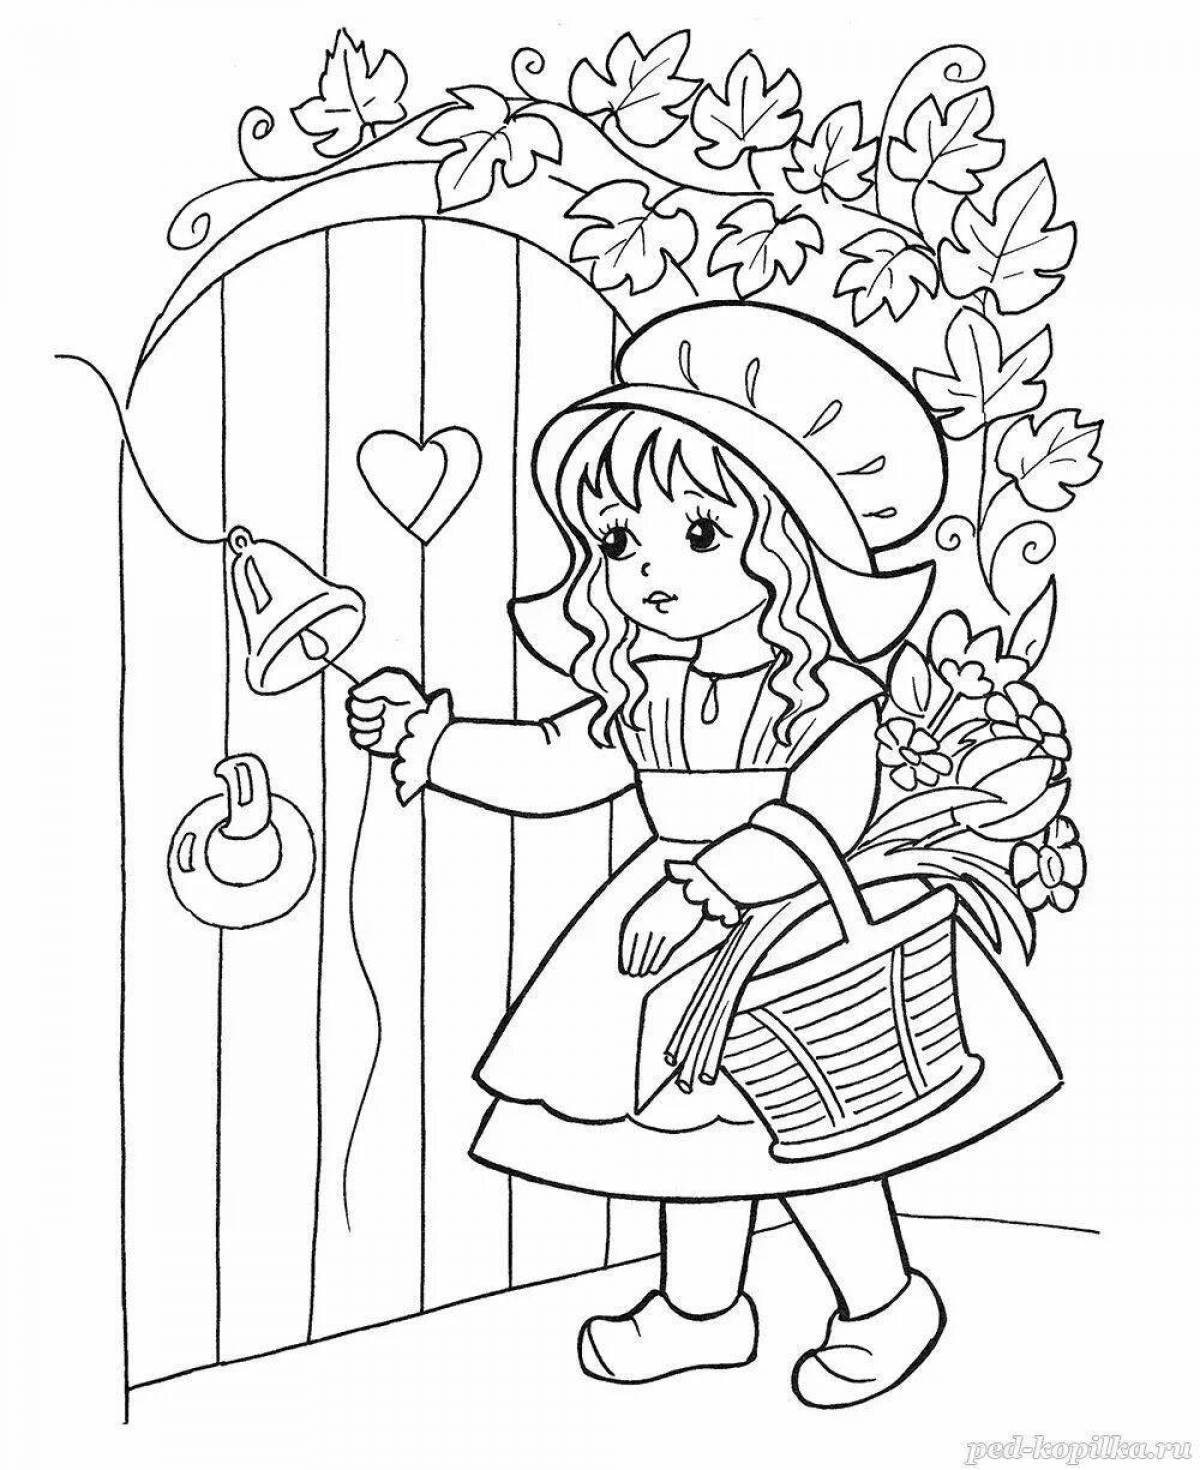 Colorful coloring book from Perro's tales